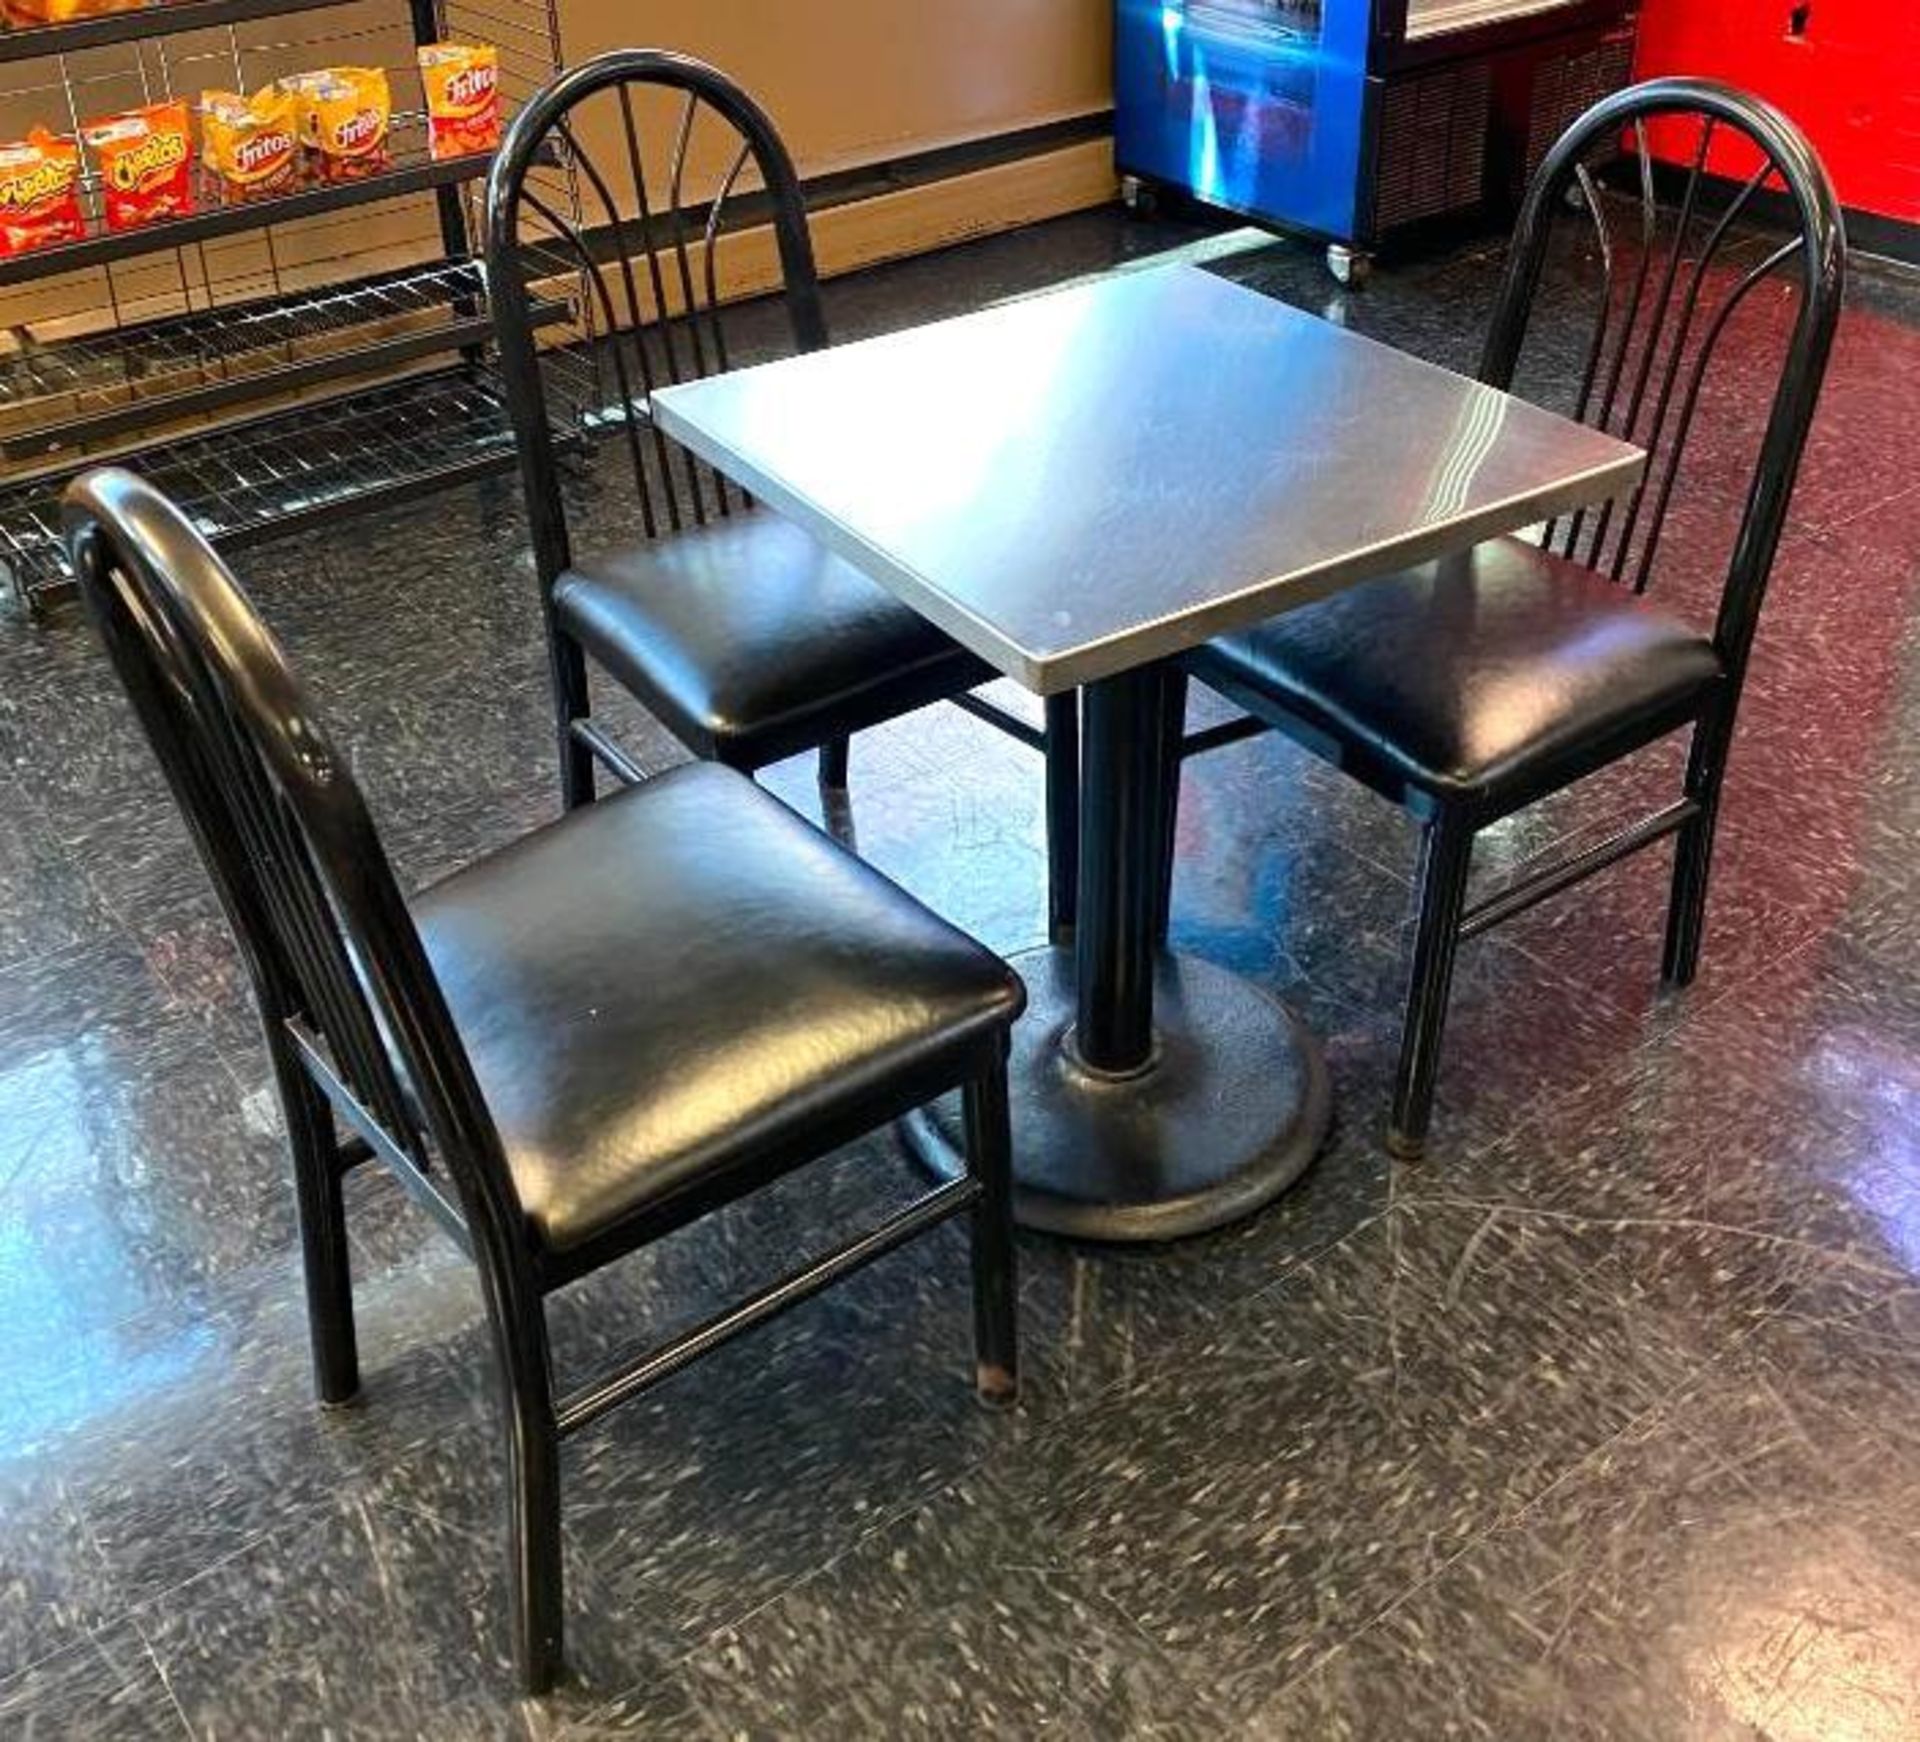 DESCRIPTION: STAINLESS TABLE WITH (3) DINING CHAIRS SIZE: 24"X24" THIS LOT IS: ONE MONEY QTY: 1